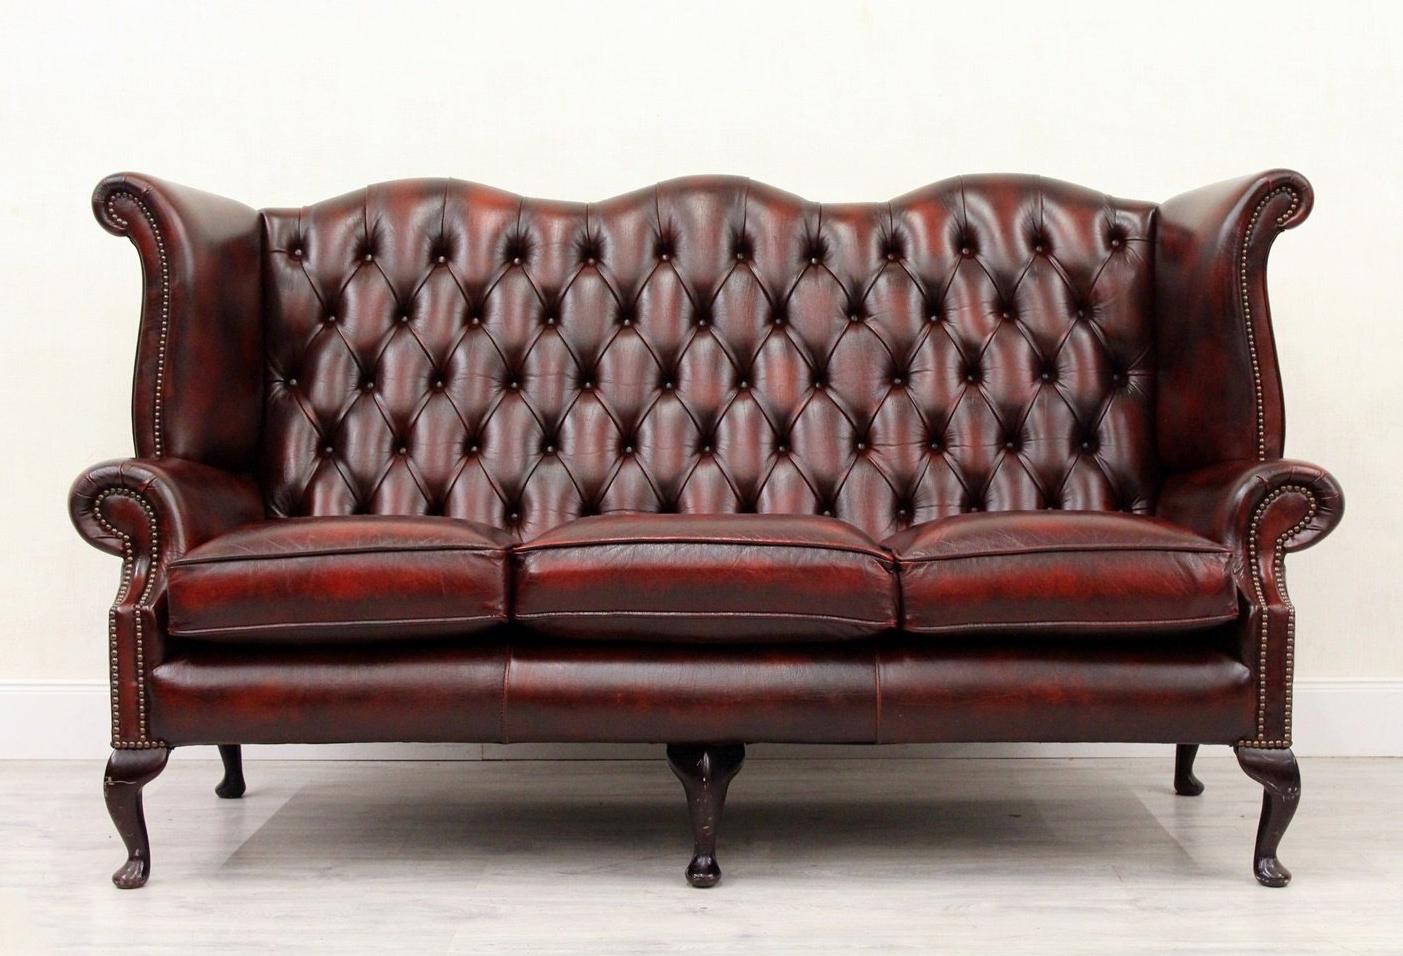 Chesterfield real leather threesome sofa and 2 armchairs
in original design 1980-1990

Condition: The sofa and armchairs are in very good condition, with normal signs of usage.
sofa
Measures: Height x 105cm length x 190cm depth x